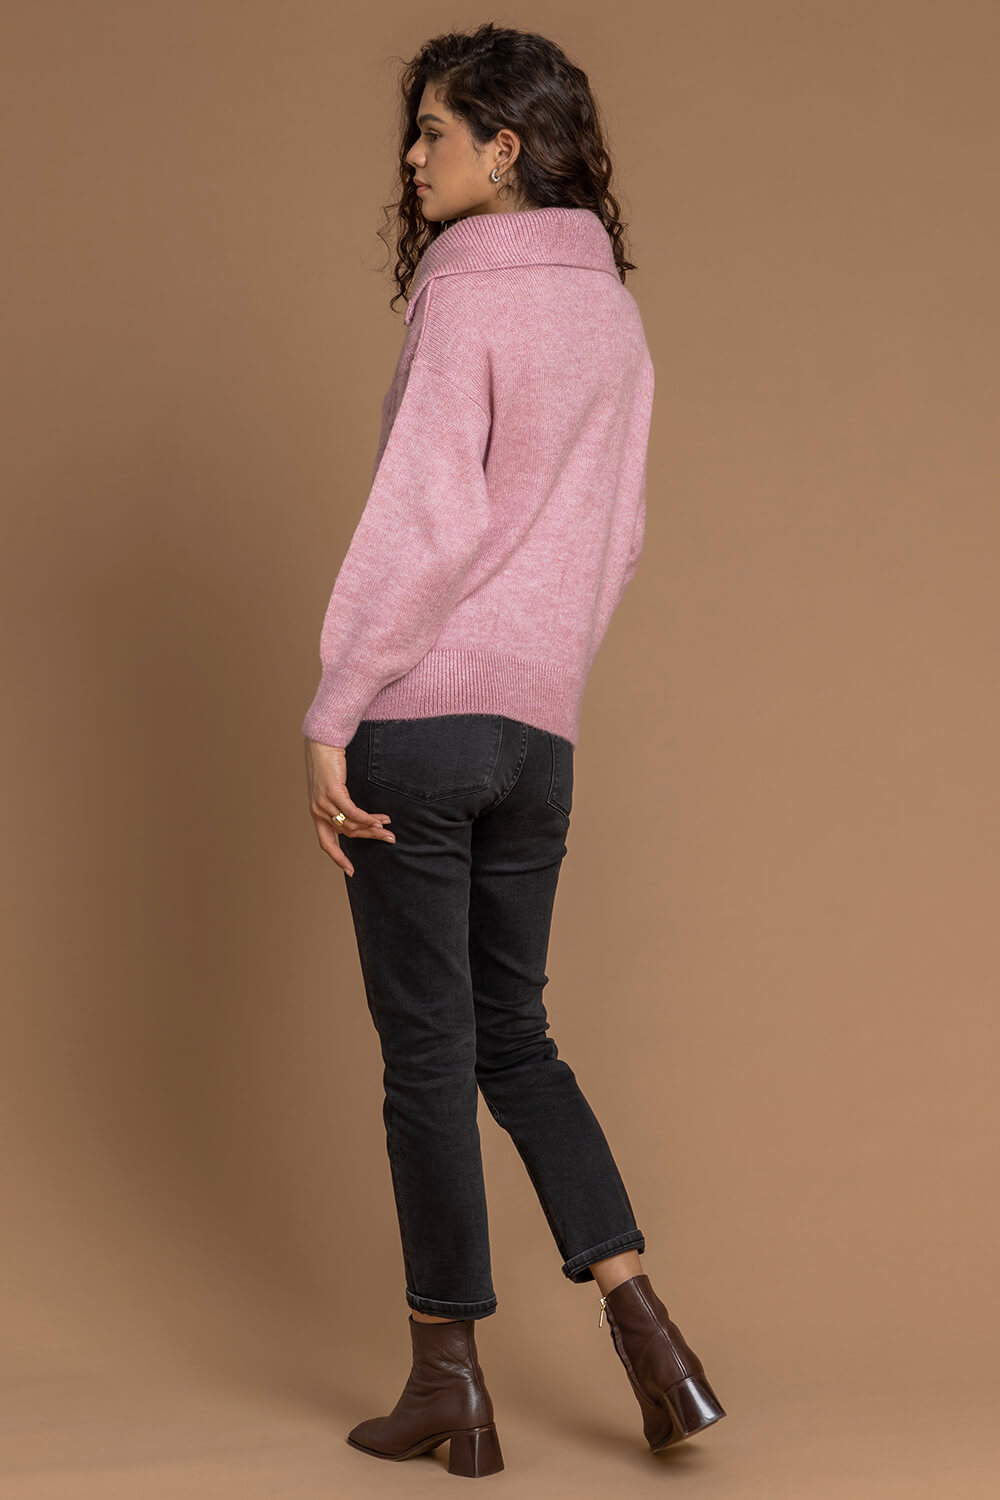 PINK Cable Knit Zip Collar Jumper, Image 2 of 5